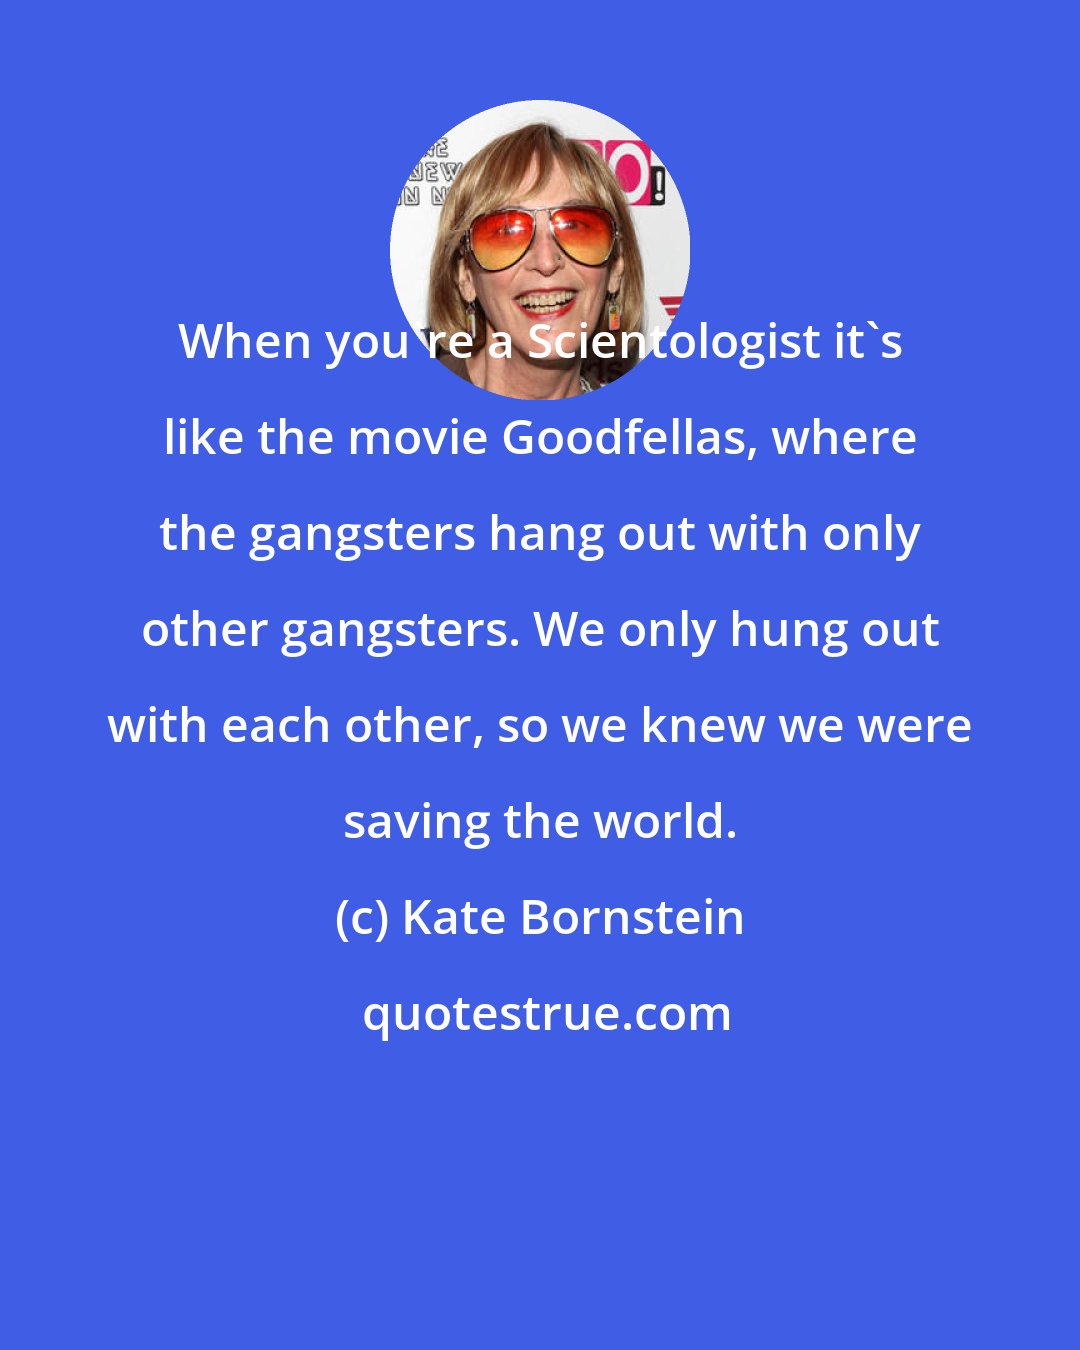 Kate Bornstein: When you're a Scientologist it's like the movie Goodfellas, where the gangsters hang out with only other gangsters. We only hung out with each other, so we knew we were saving the world.